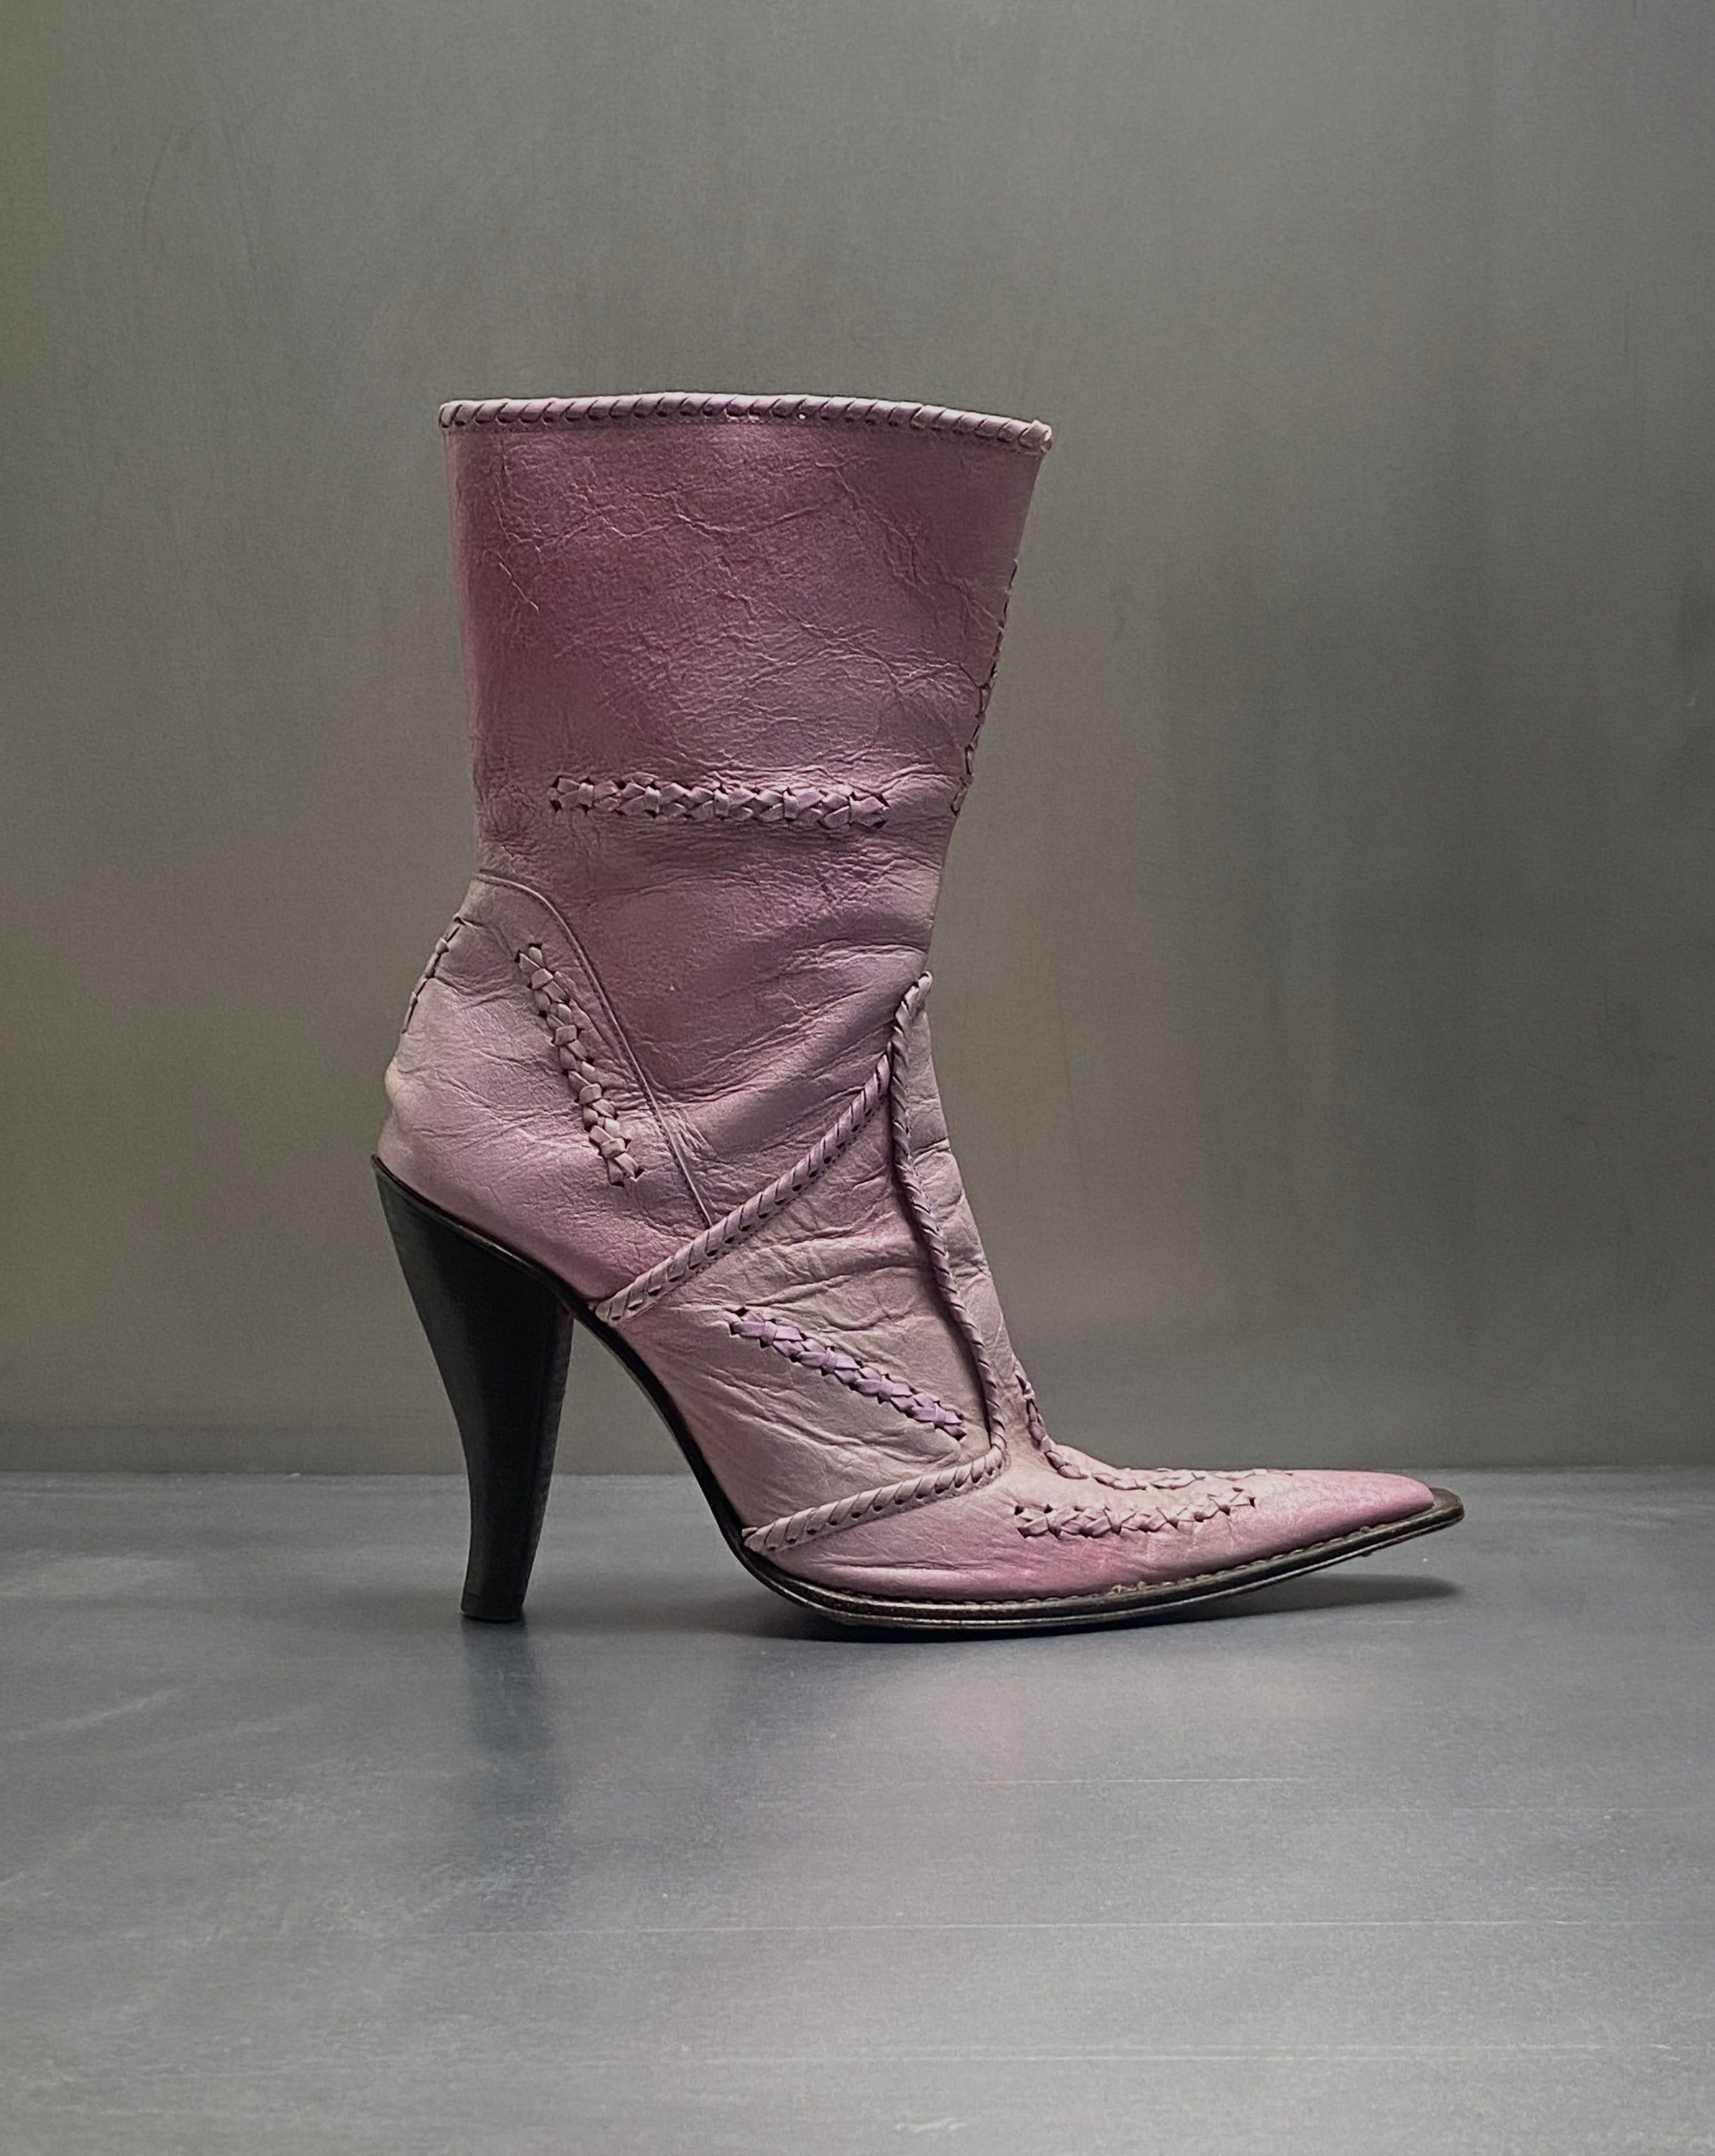 Vintage 90s Pink Leather Western Boots